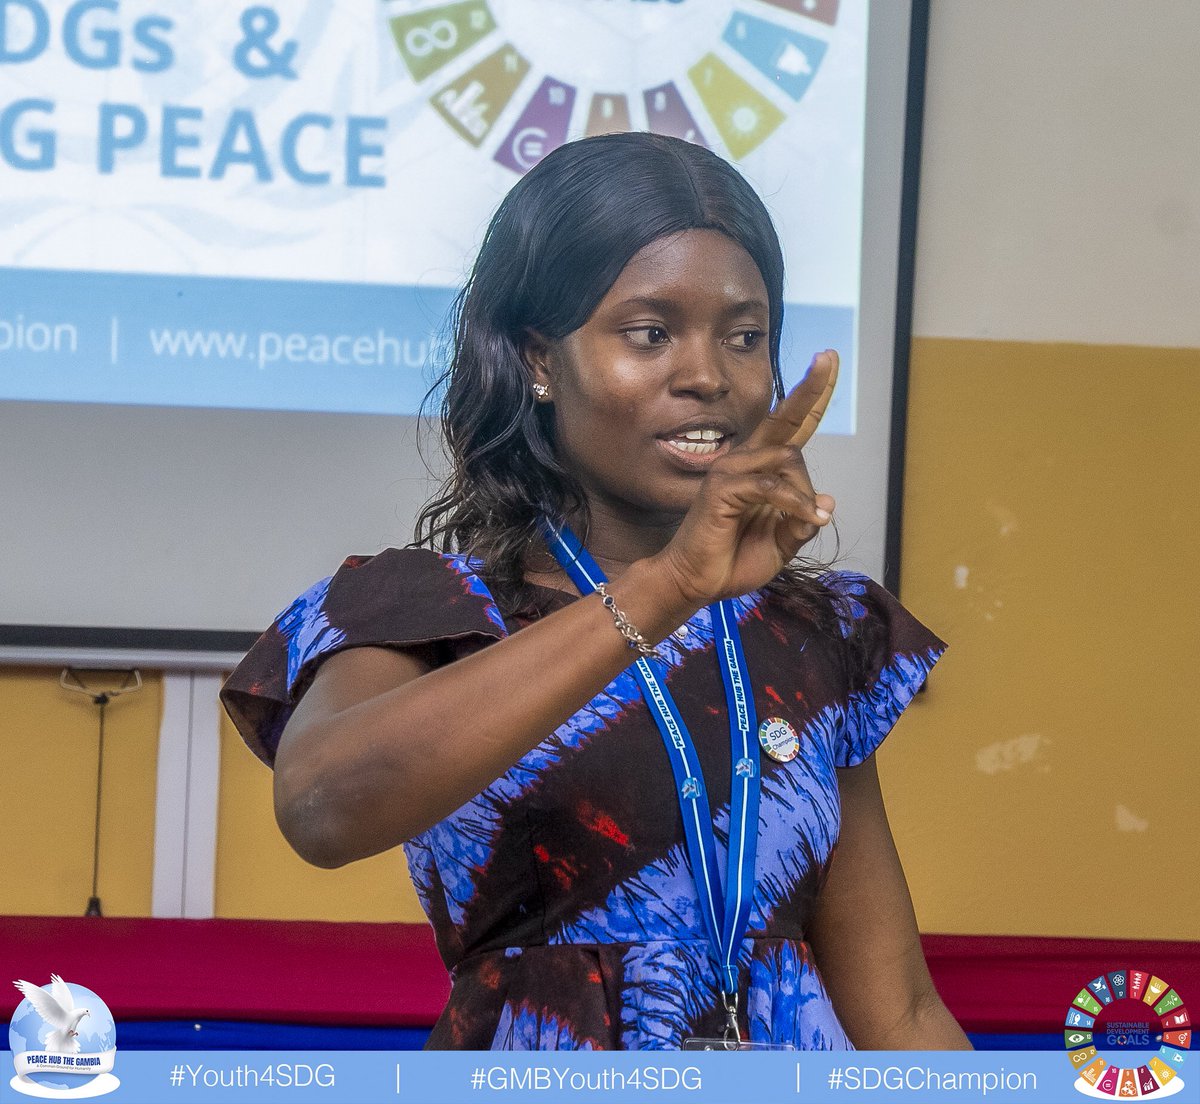 As we @GambiaPeace rolled out the SDG~Challenge in The Gambia🇬🇲, we’re certain that young people are ready to innovate solutions that will solve the problems we face as a country.

Together we can solve problems 
We are the SDGs Champions 
#GMBYouth4SDGs